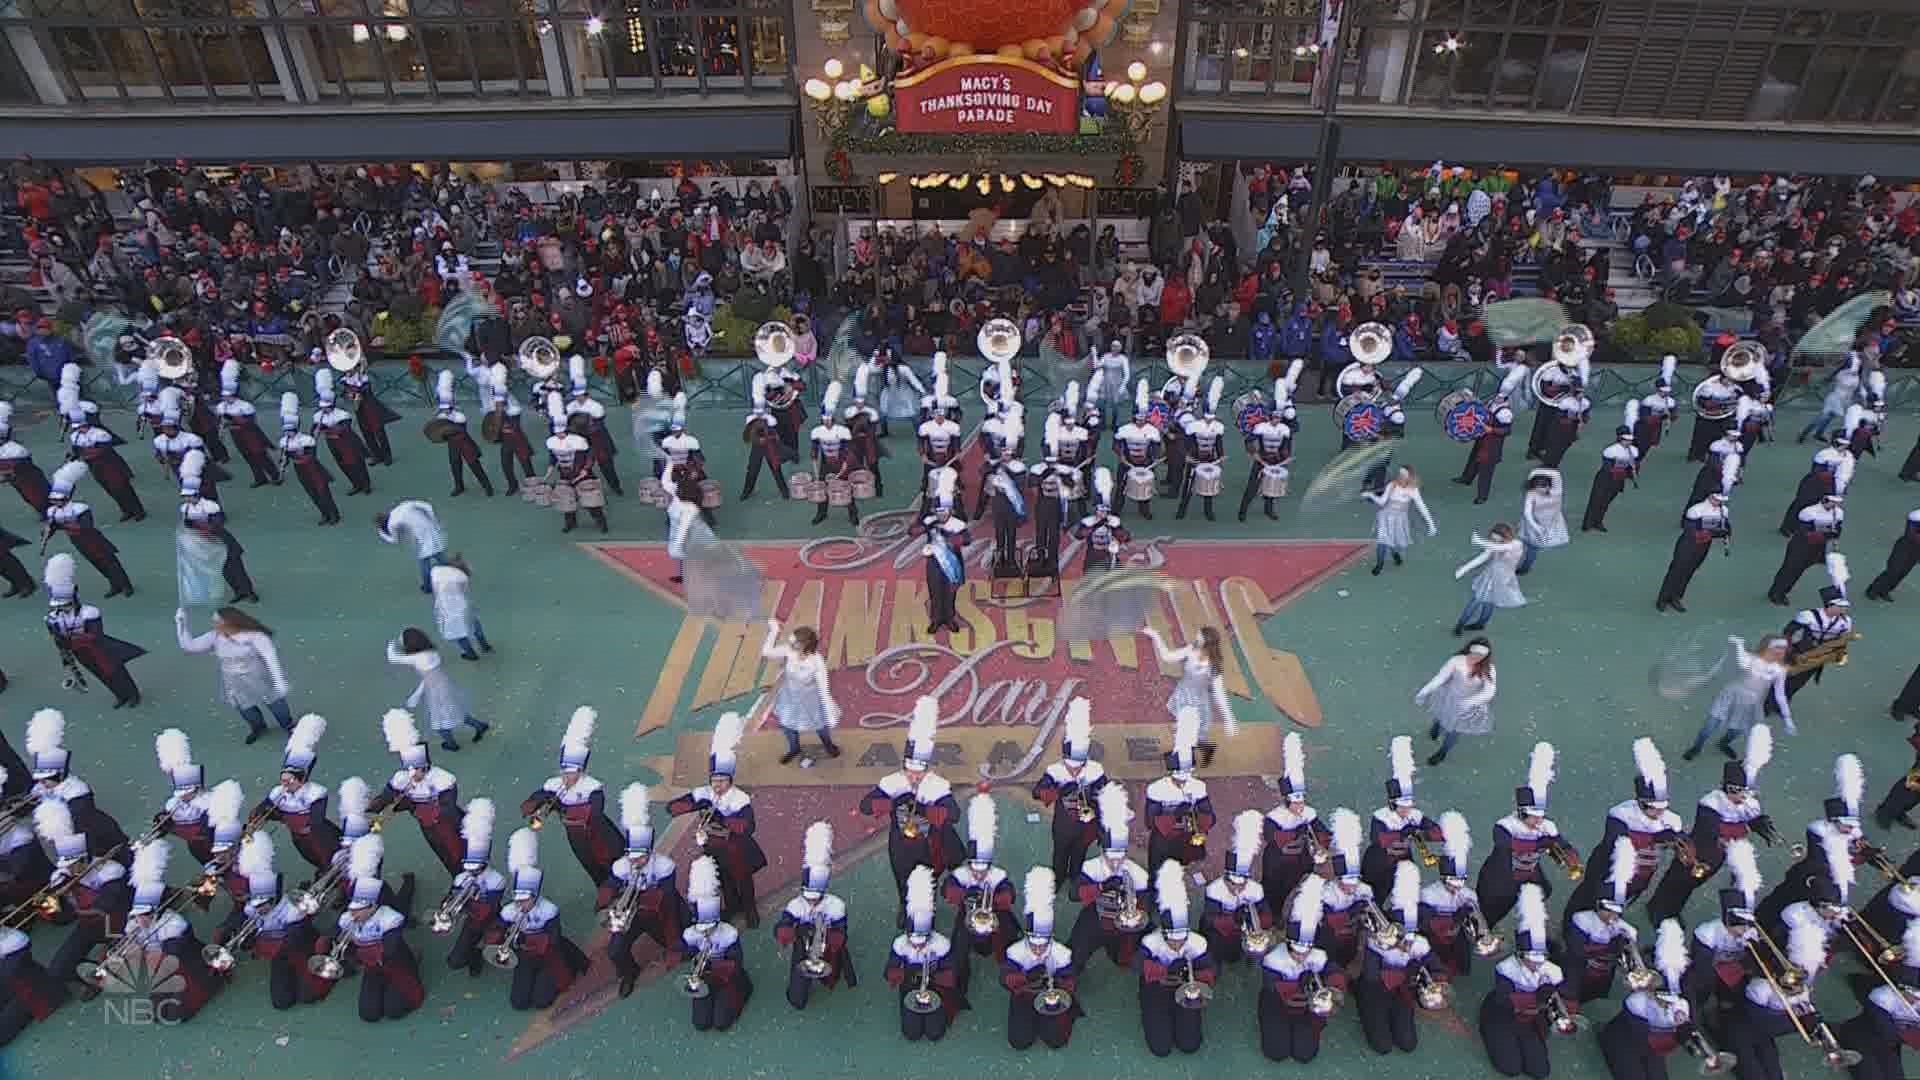 Abby Matthews and the Woodland High School Wildcat Marching Band out of Cartersville, Georgia were named the recipients of the 2018 Bob Hope Band Scholarship and performing in Macy's Thanksgiving Day parade.